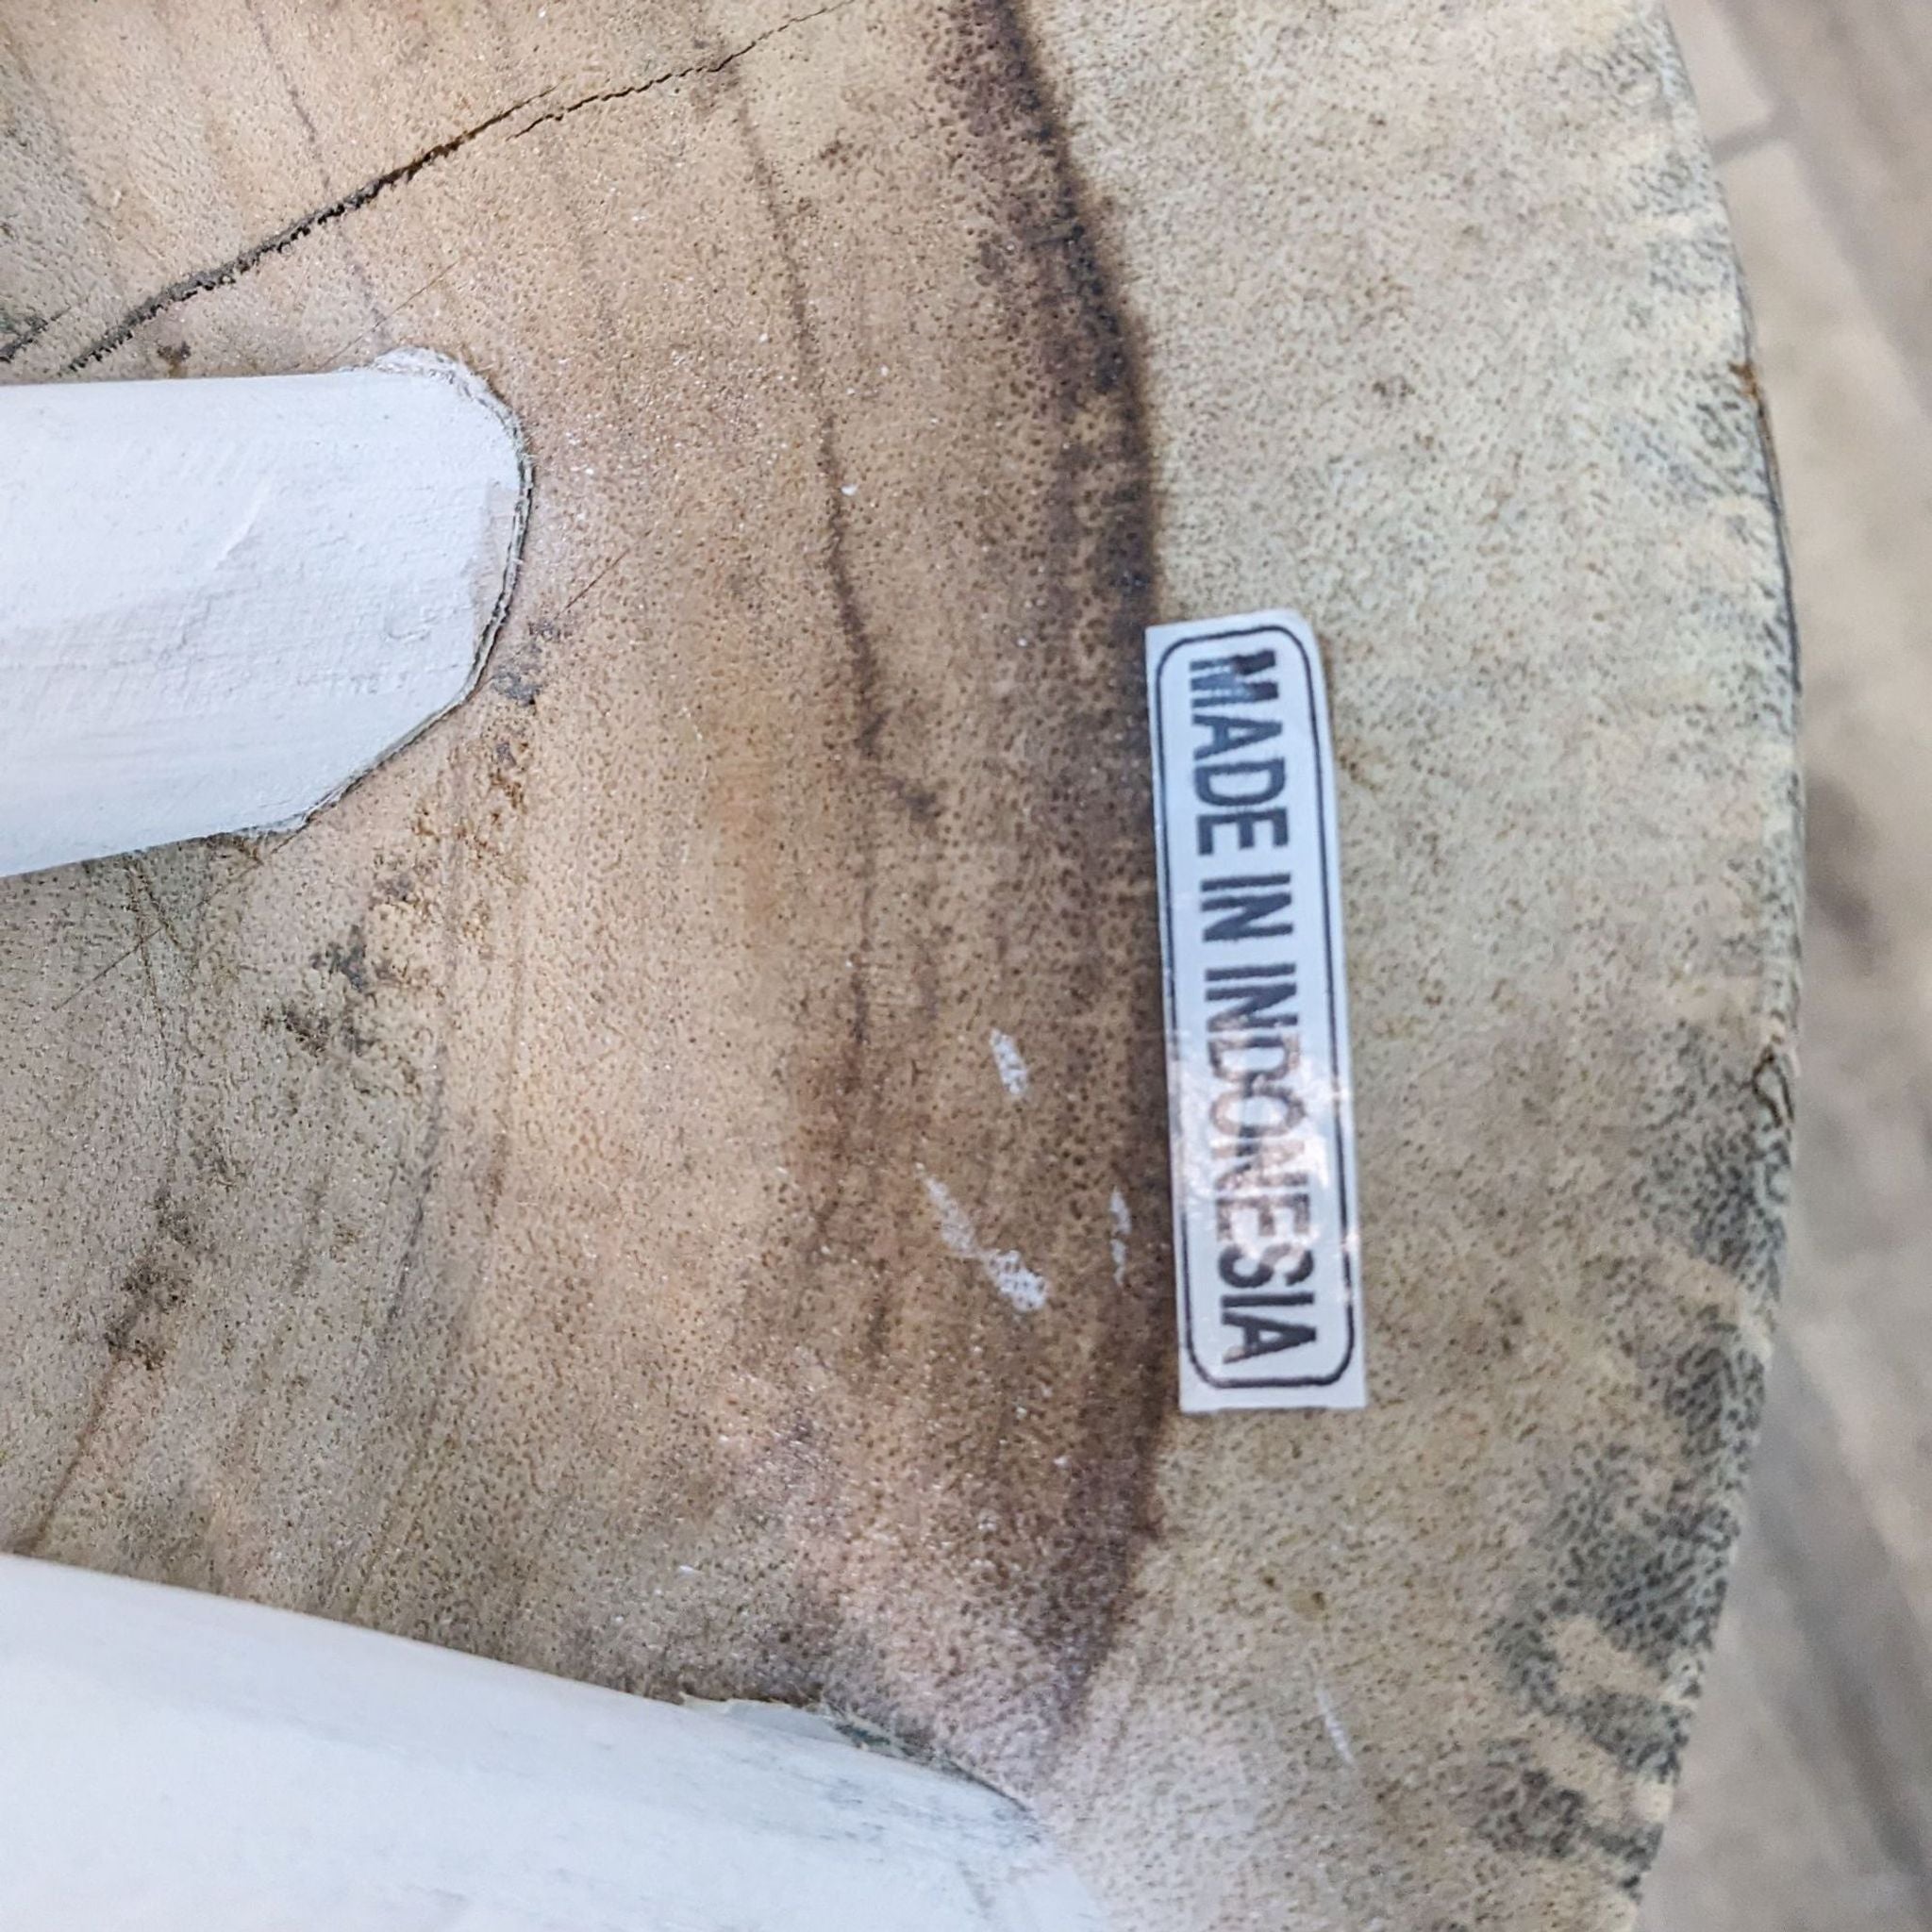 2. Close-up of a Reperch side table with a rustic wooden top and a "Made in Indonesia" label, highlighting the table's unique branch-like legs.